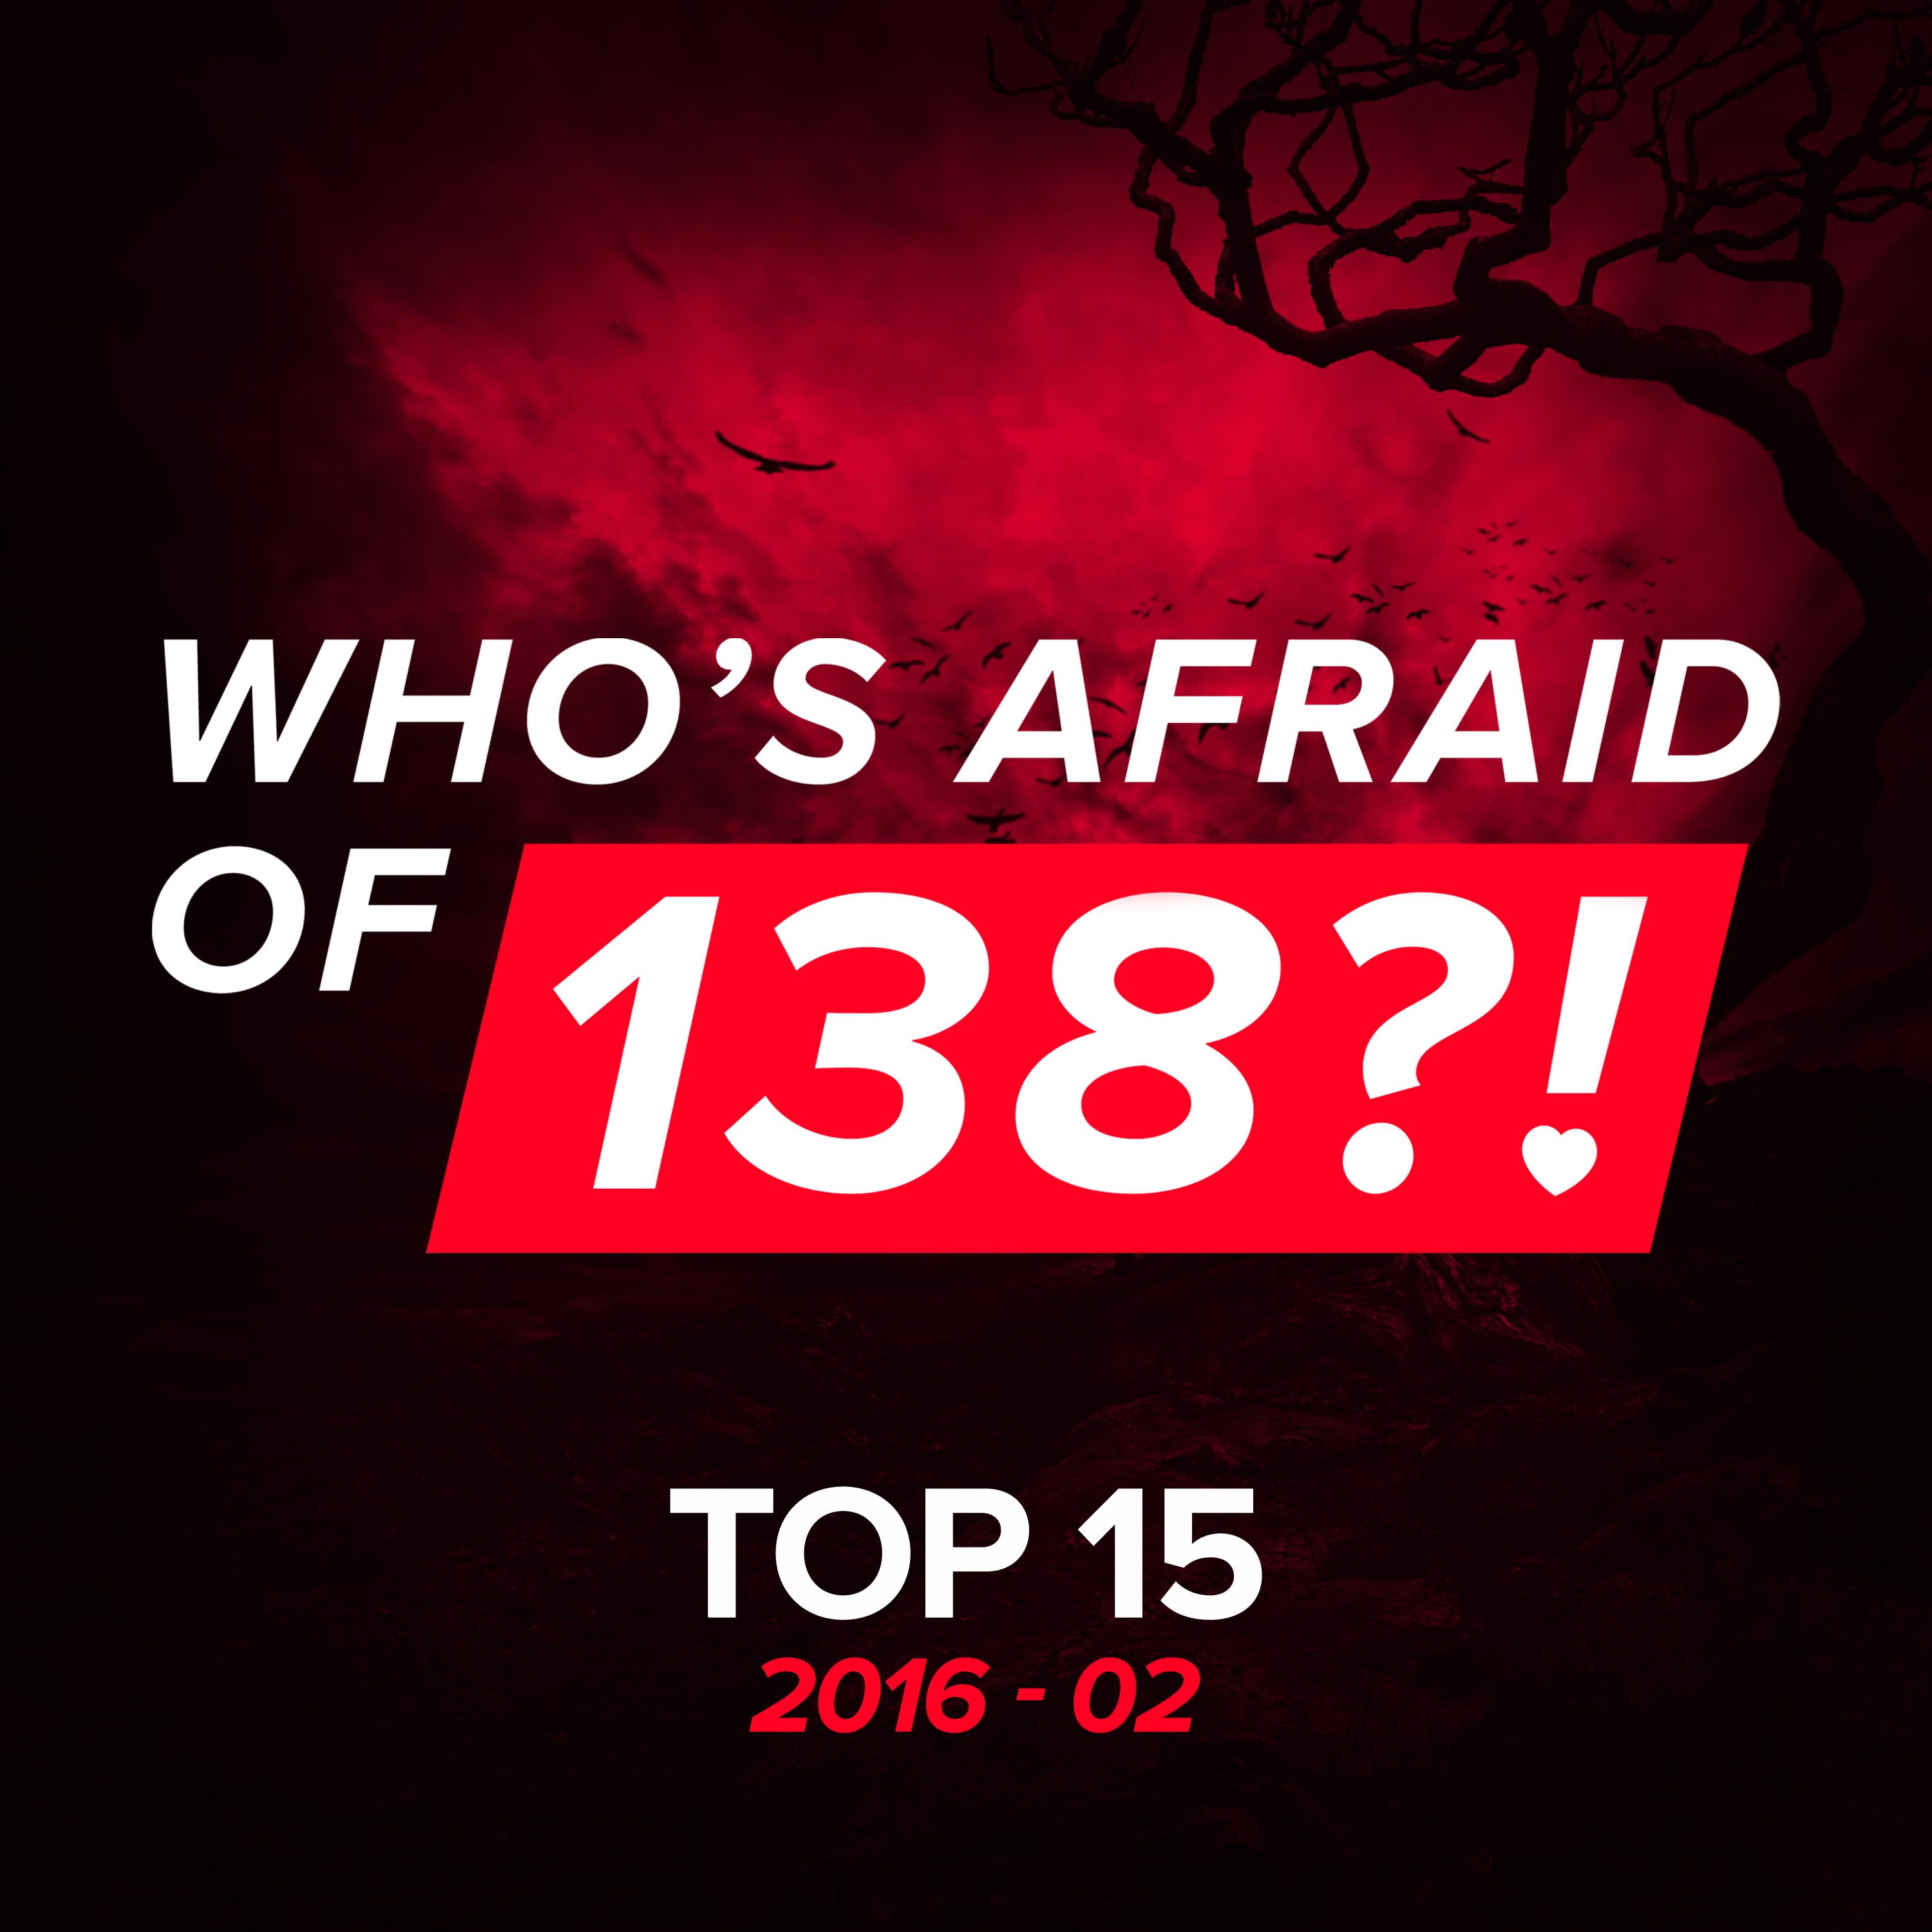 Who's Afraid Of 138?! Top 15 - 2016-02